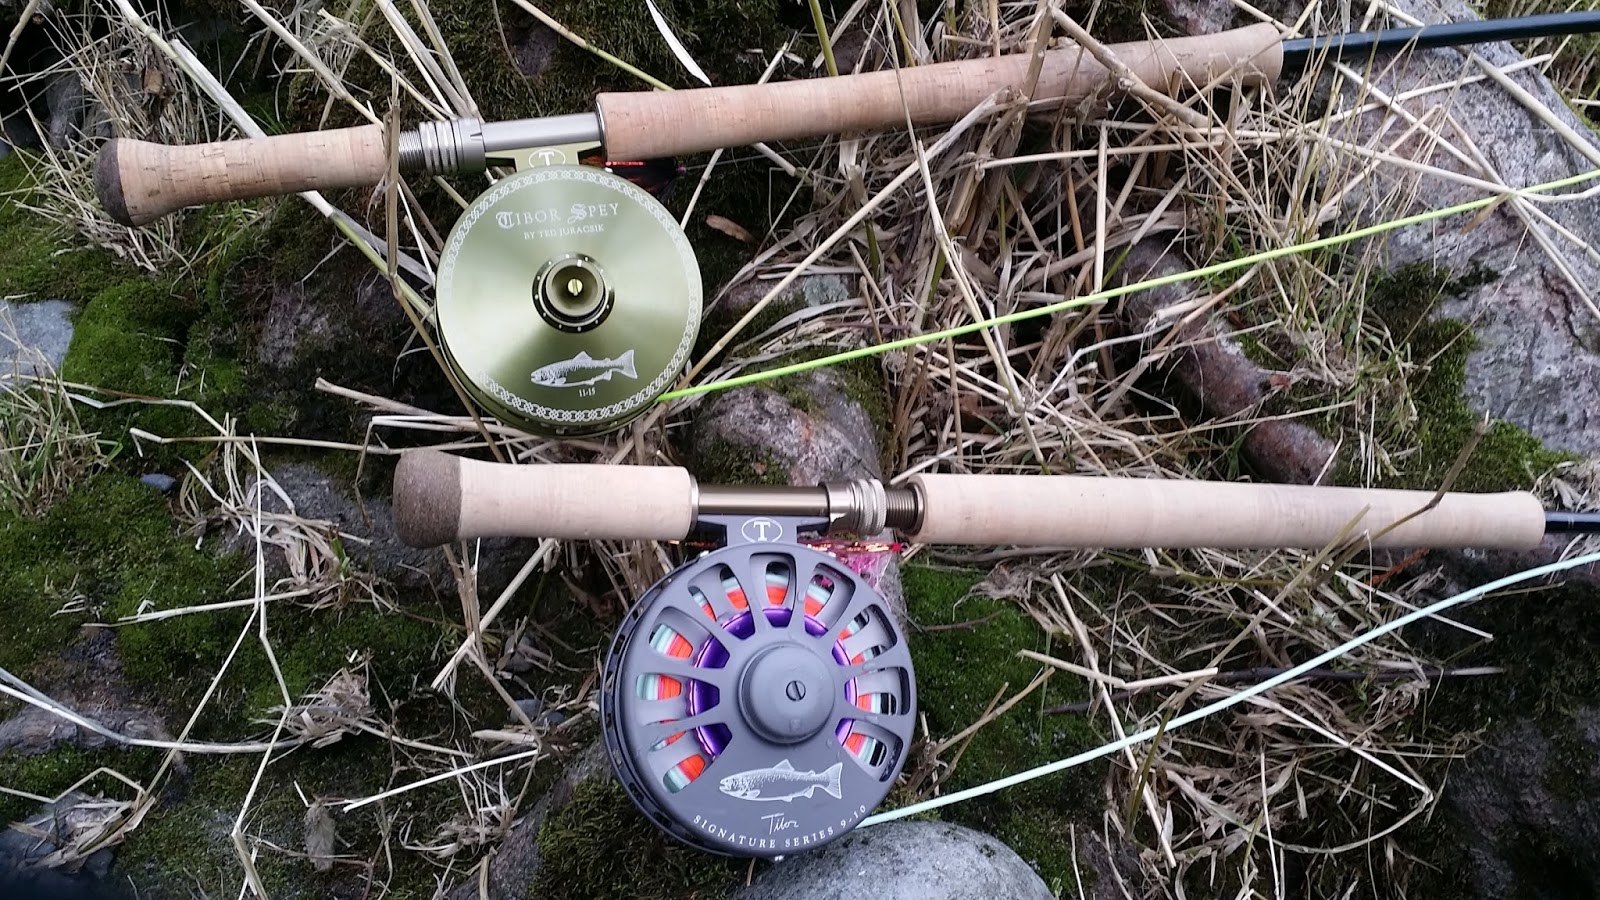 Gorge Fly Shop Blog: Galvan Torque includes a Free Fly Line